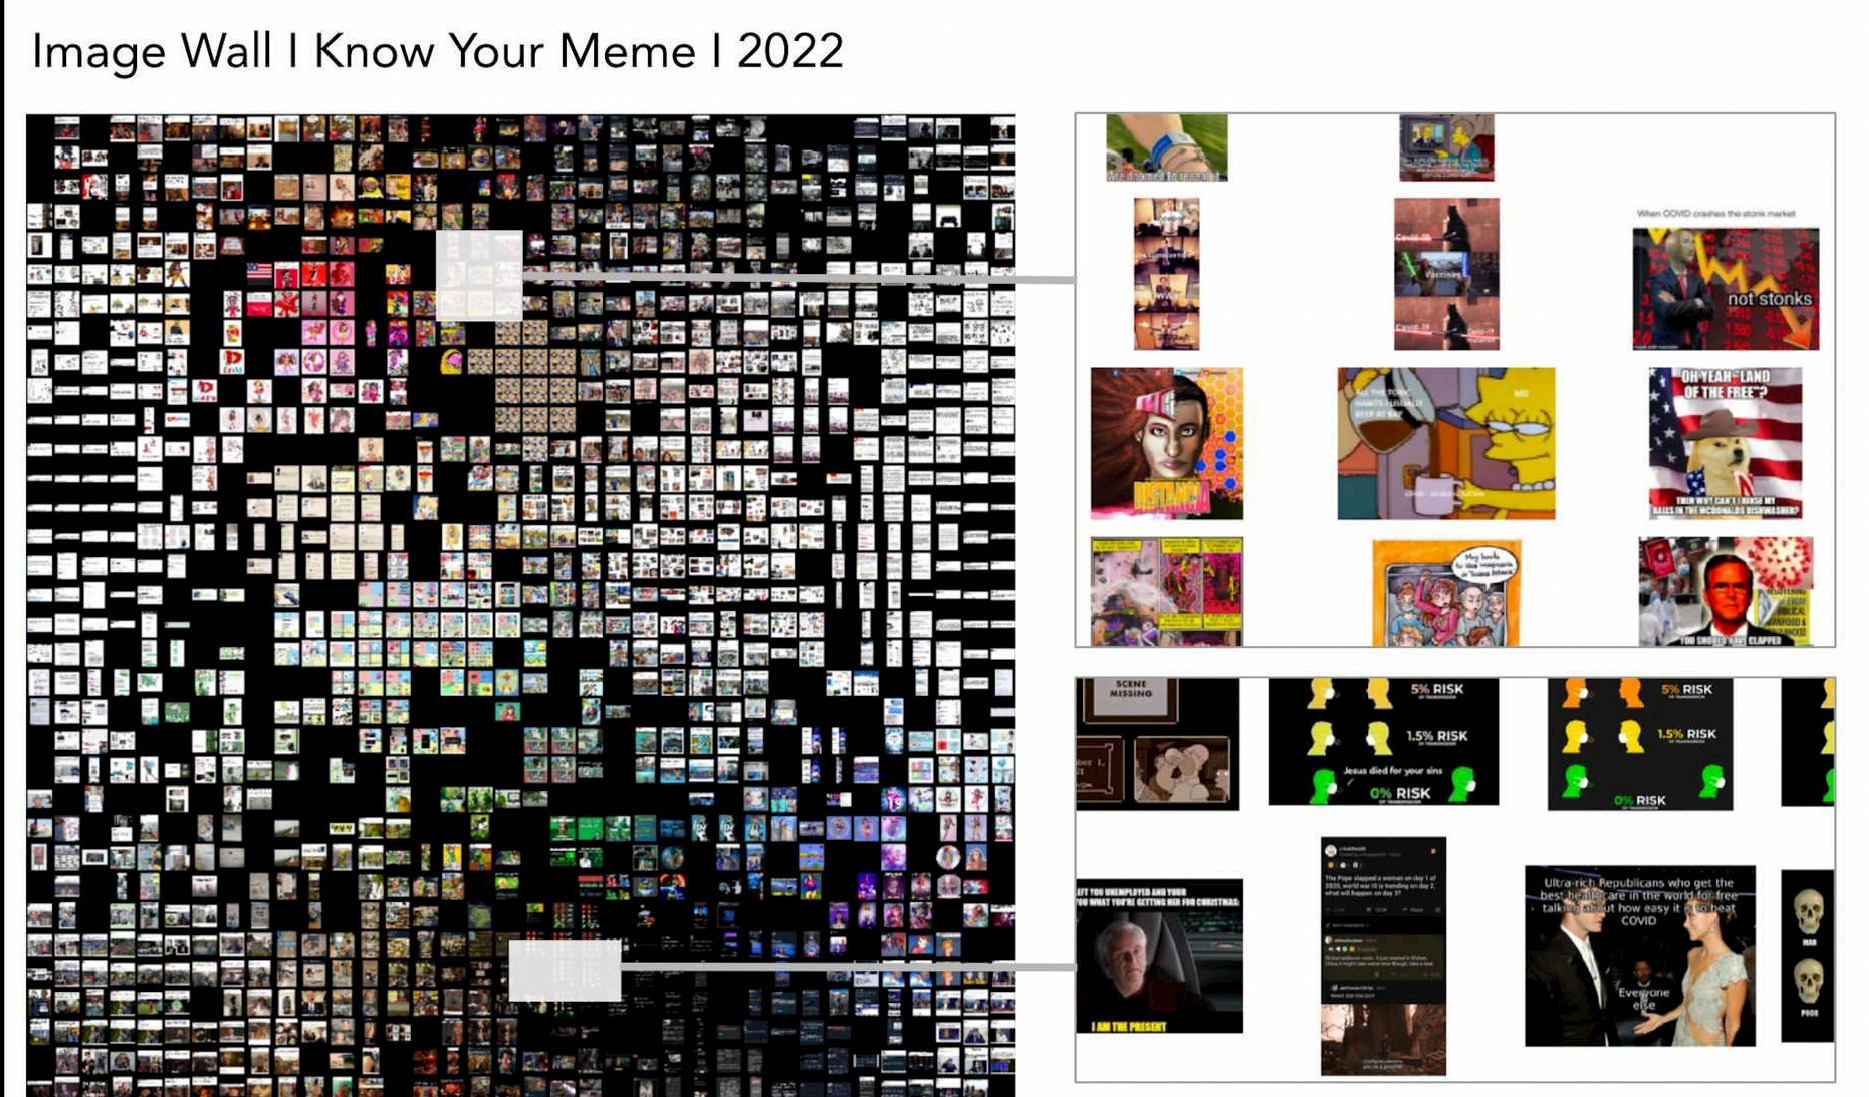 MemeChat launches first-ever Artificial Intelligence meme generator